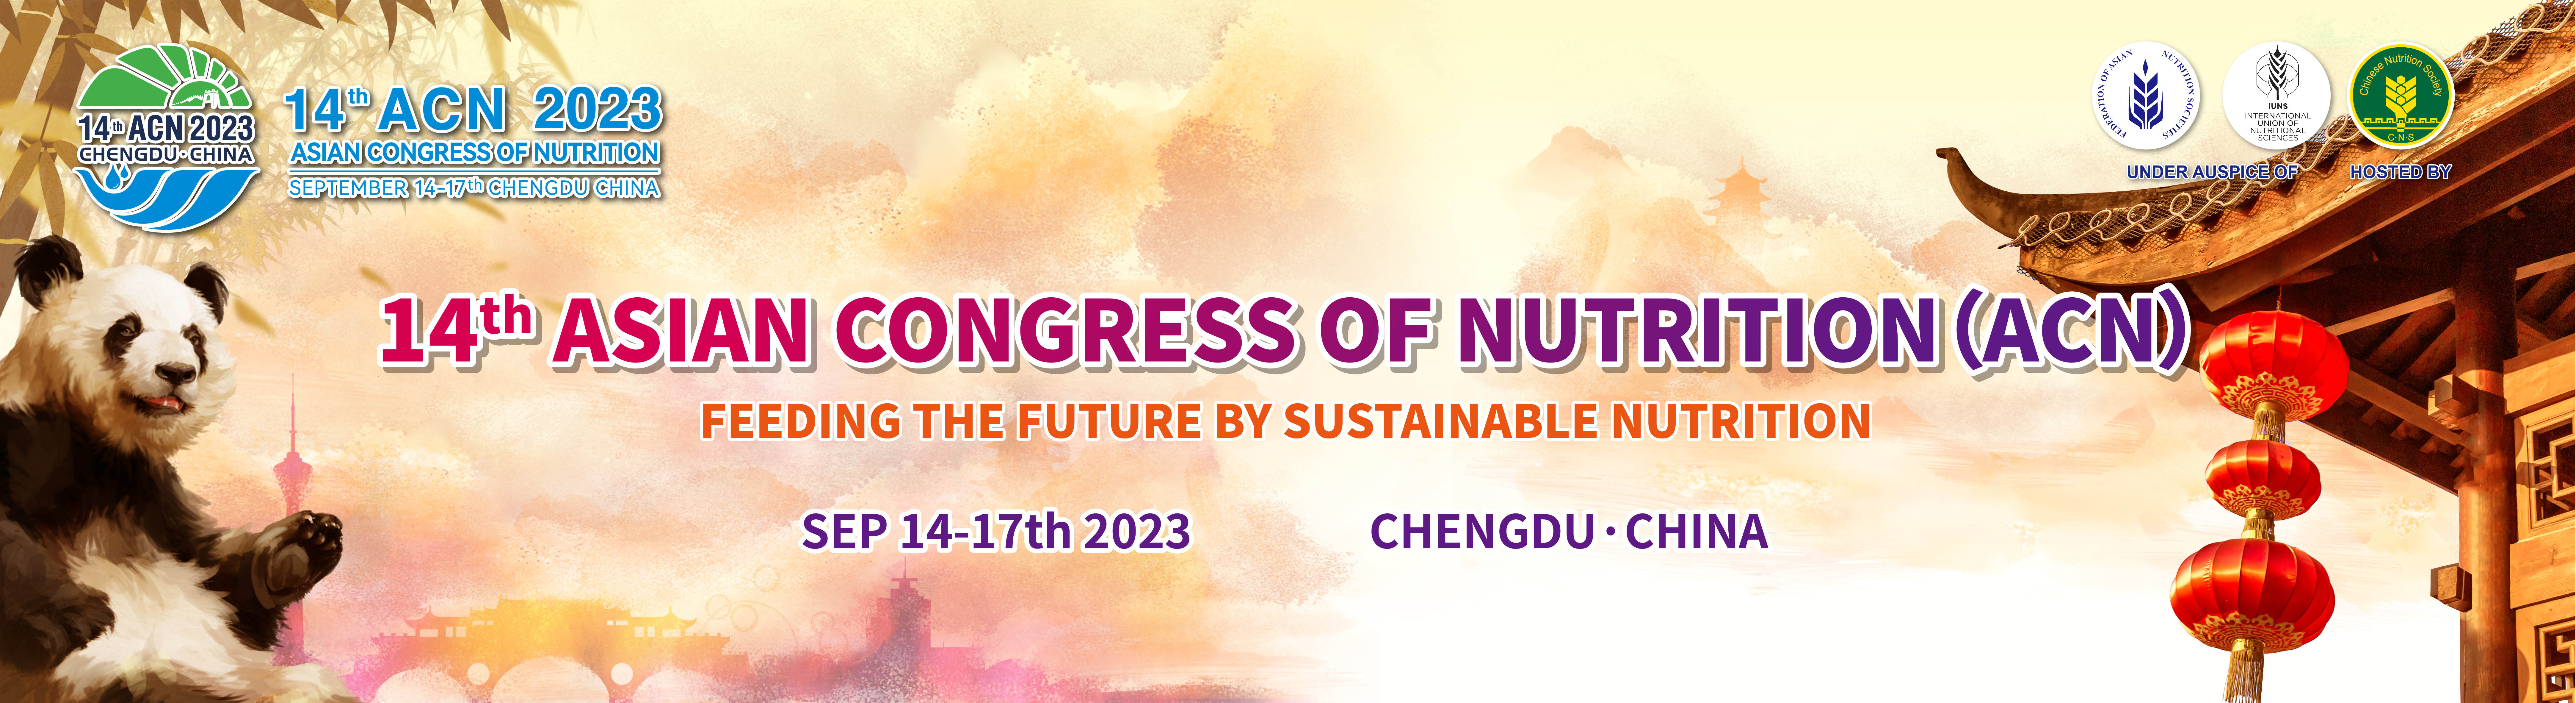 14th Asian Congress of Nutrition